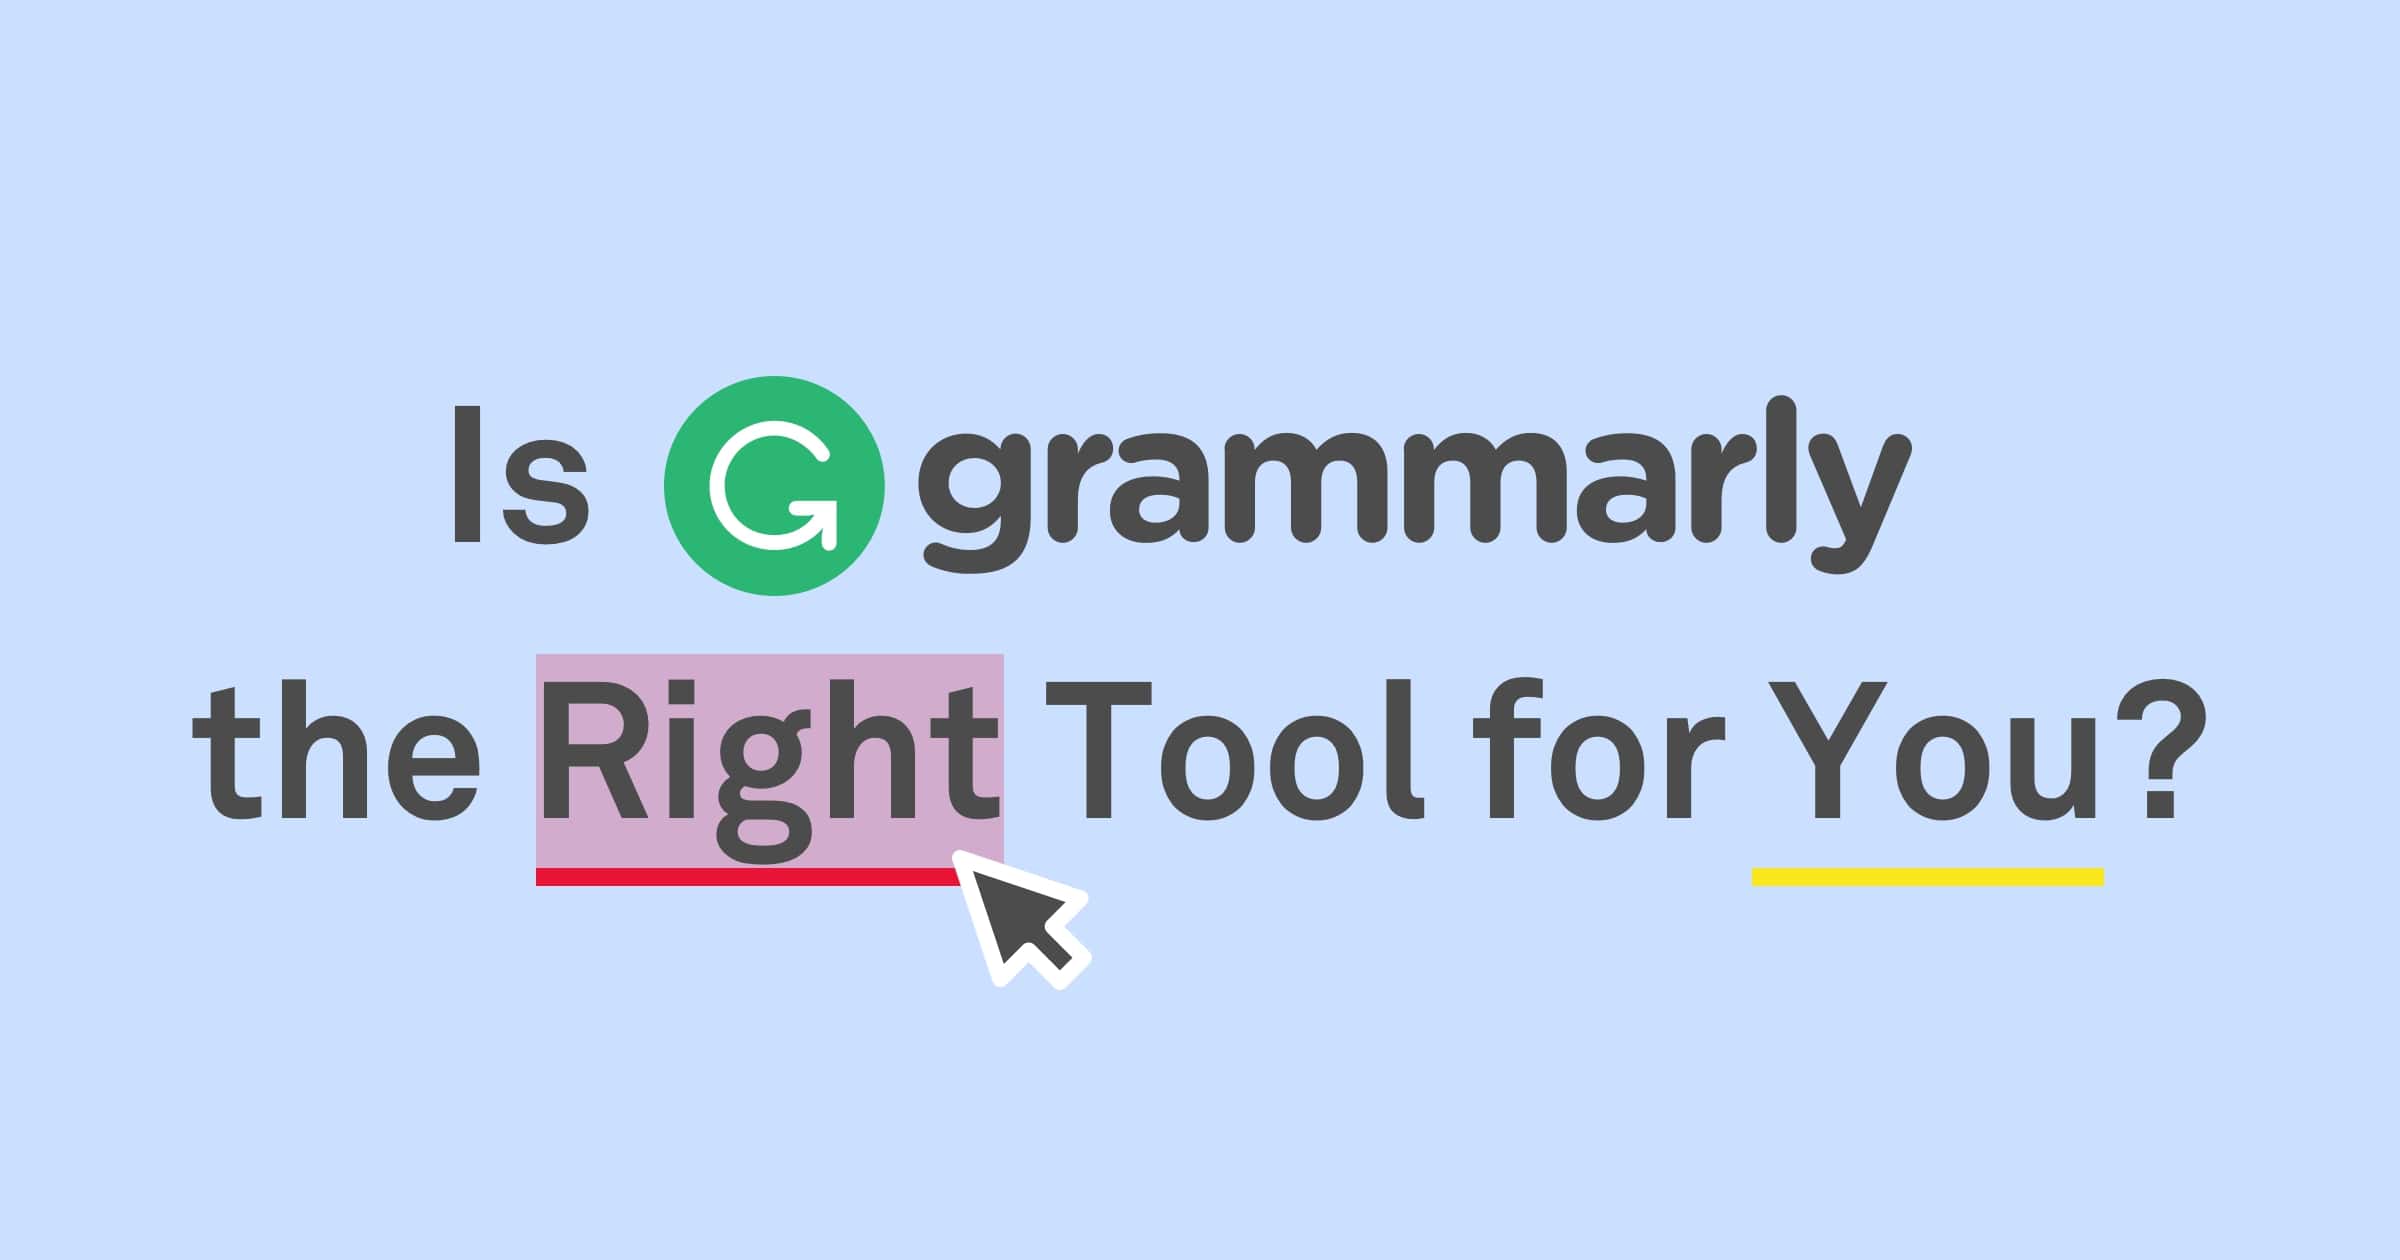 Grammarly makes it easy to create a free-of-mistake email